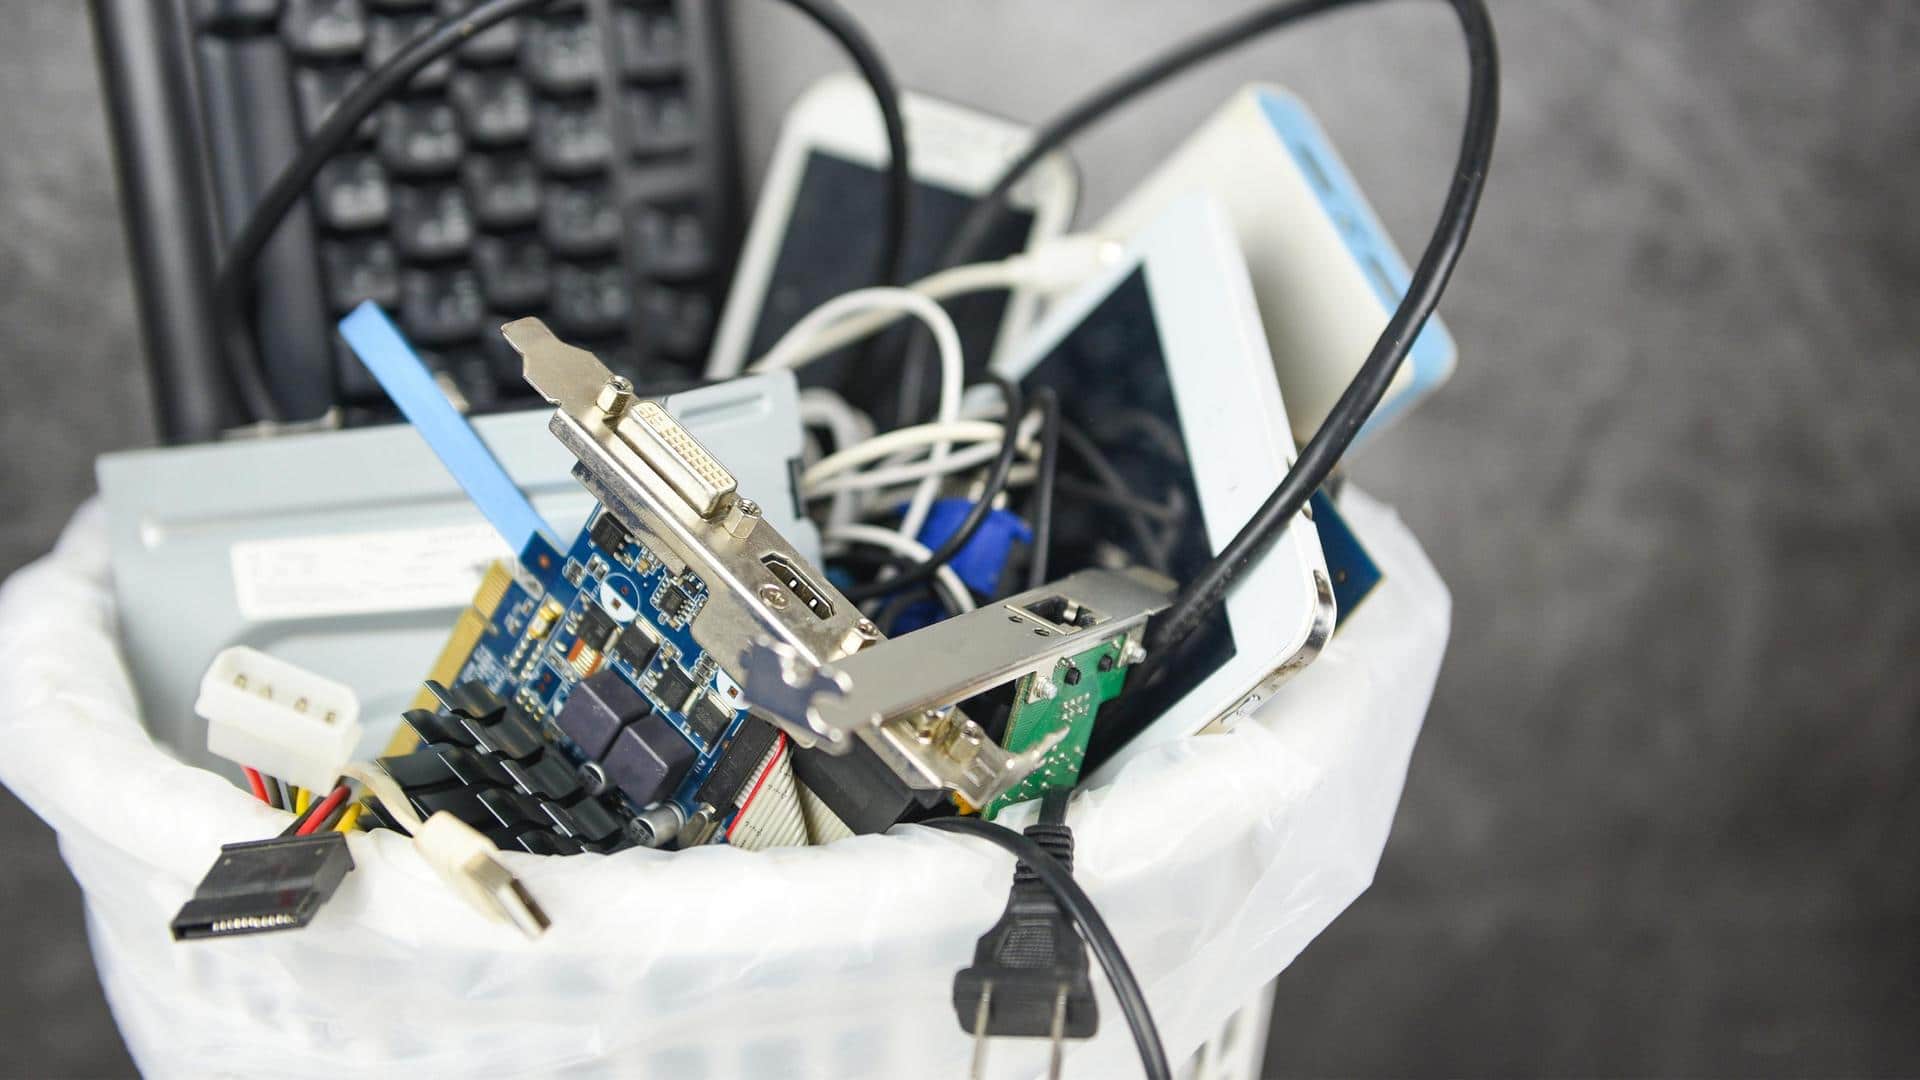 Recycling old electronics? Websites that can help you earn cash